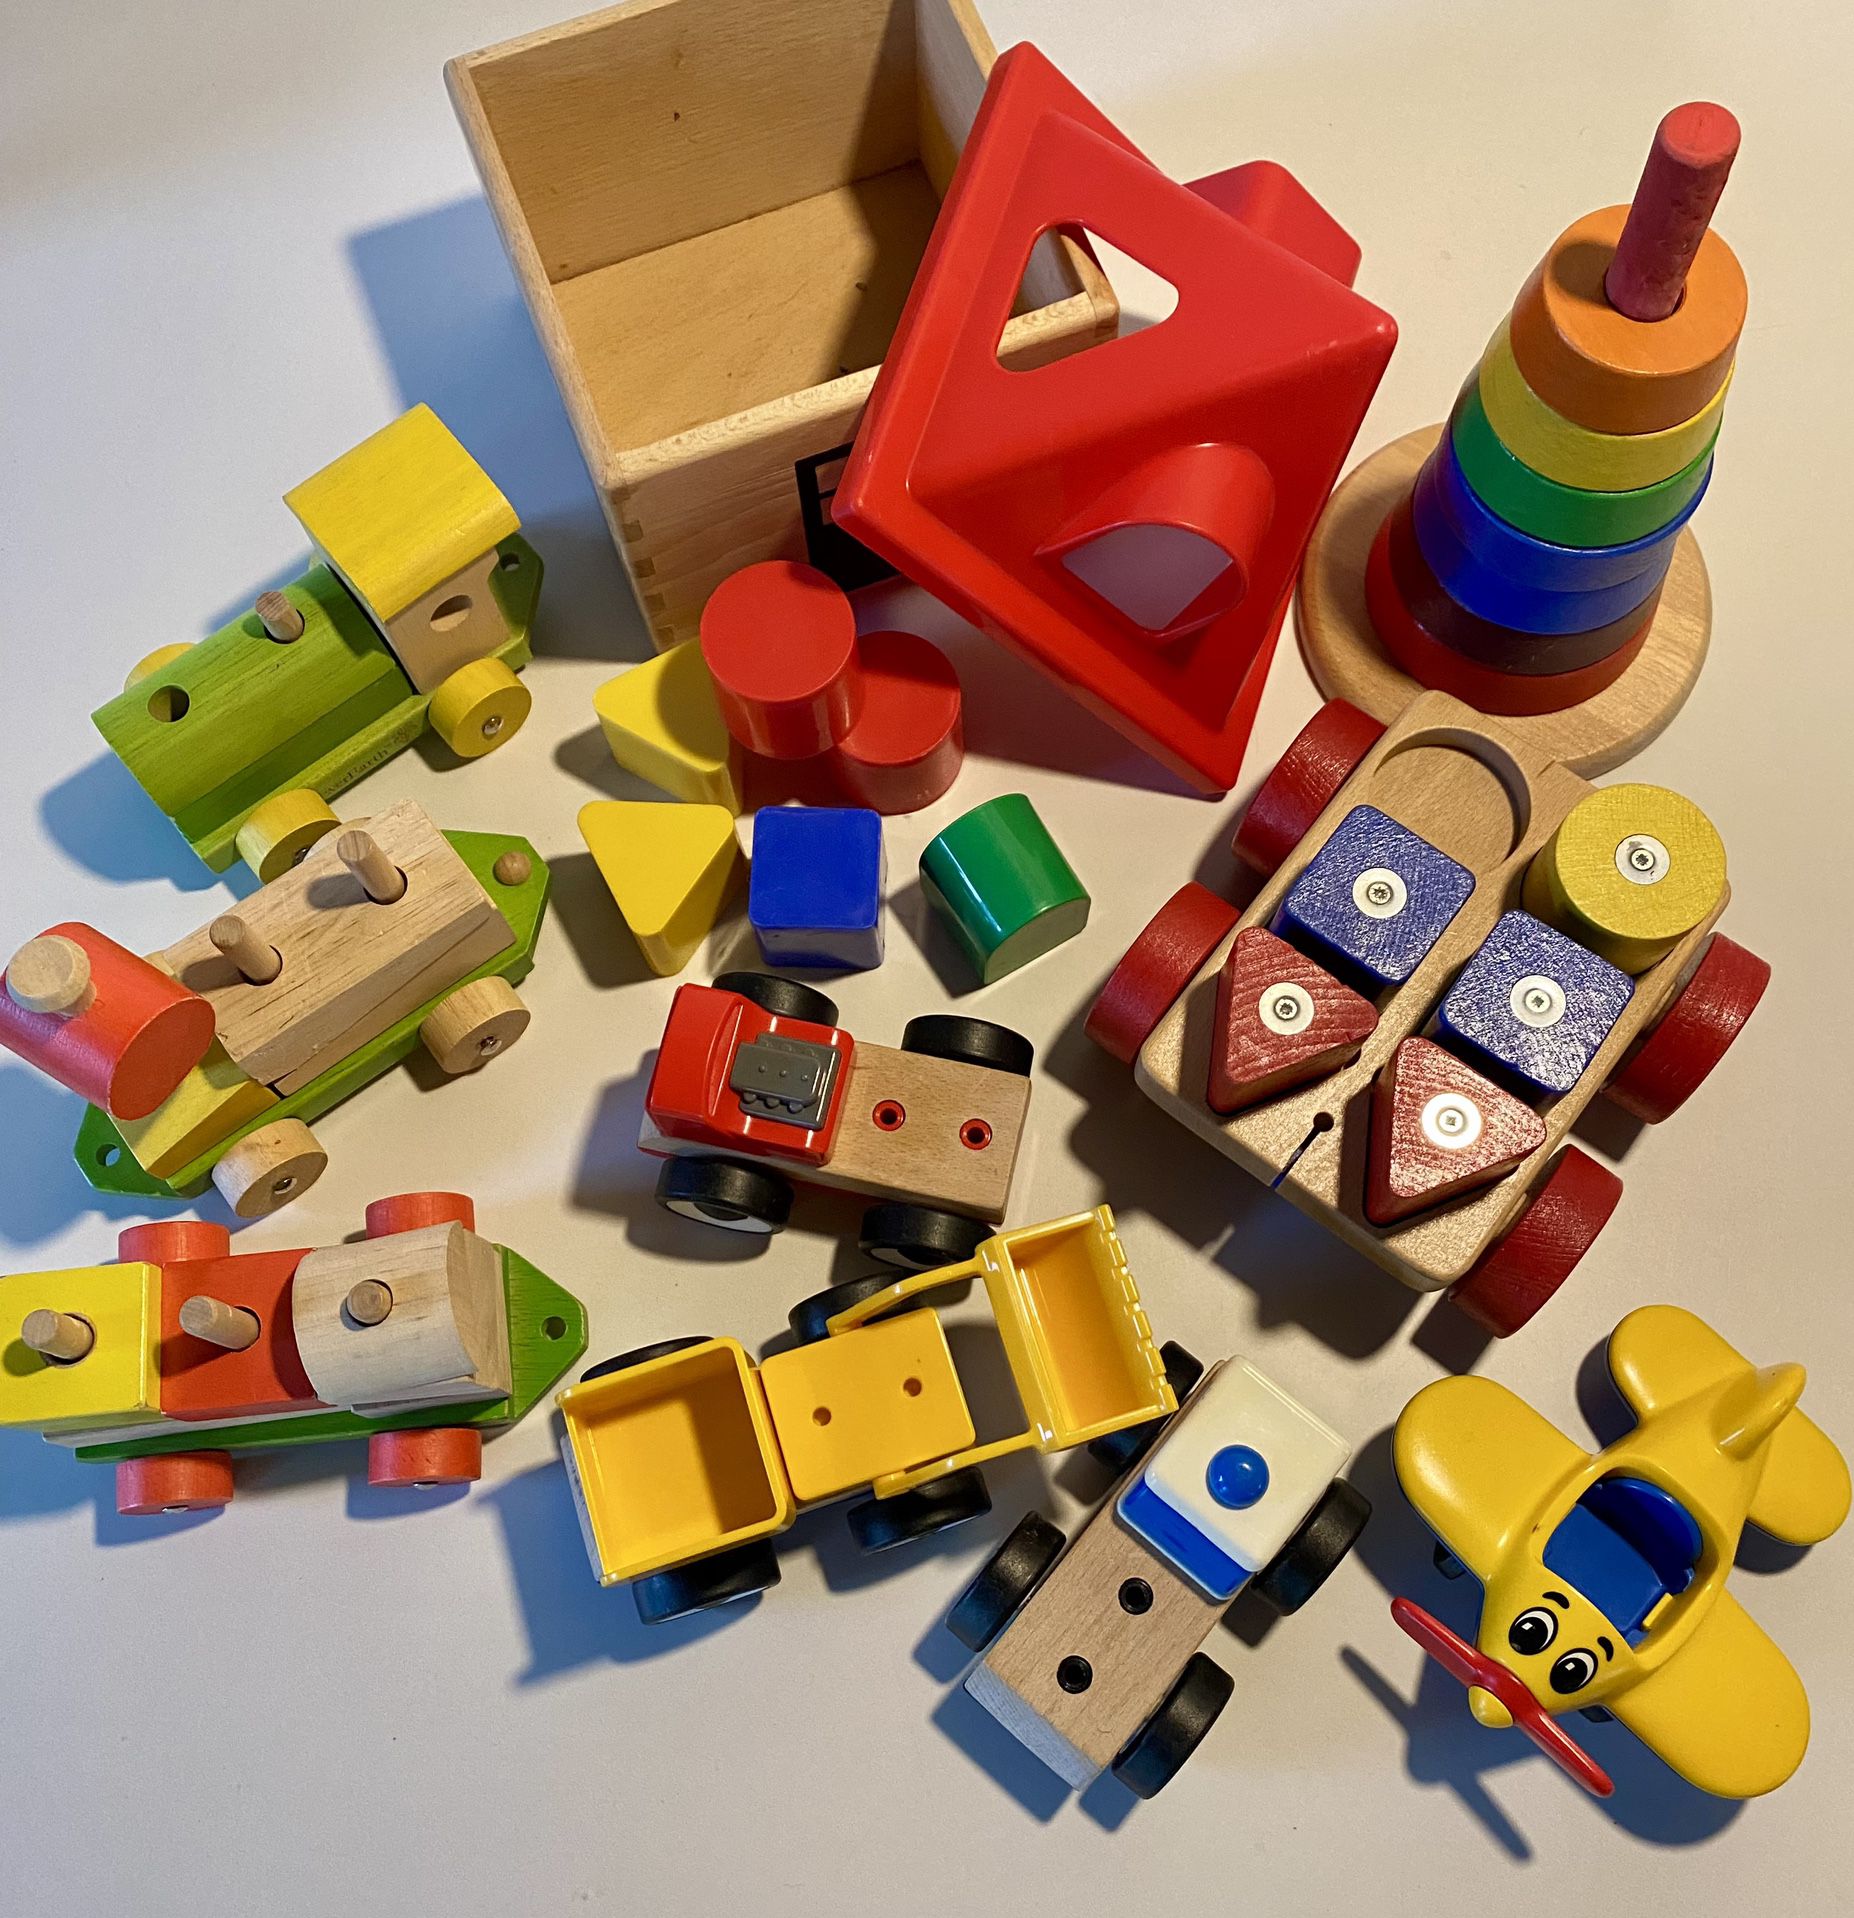 Building Blocks and Toys $10